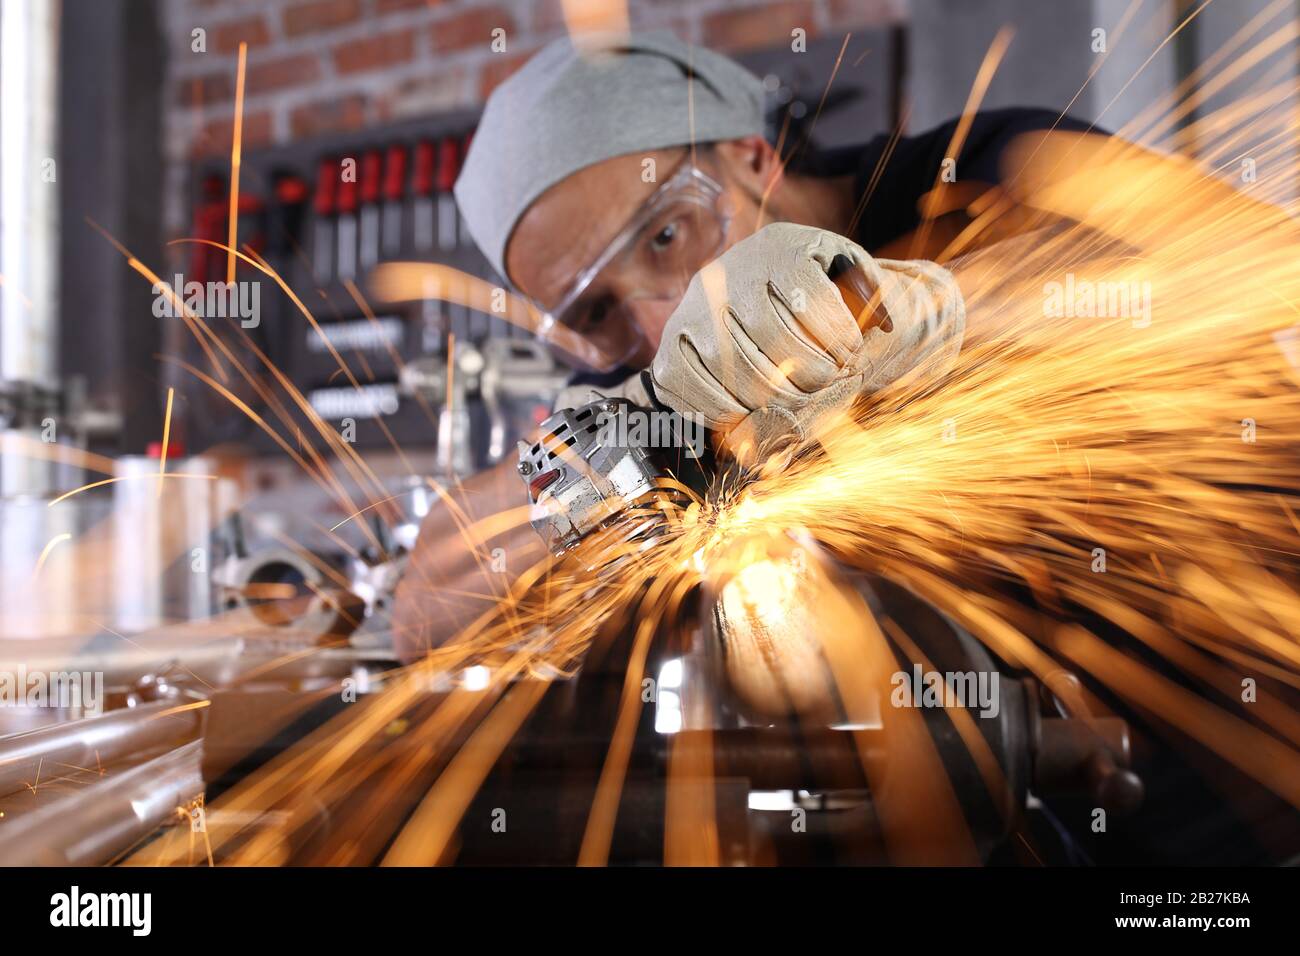 man work in home workshop garage with angle grinder, goggles and construction gloves, sanding metal makes sparks closeup, diy and craft concept Stock Photo